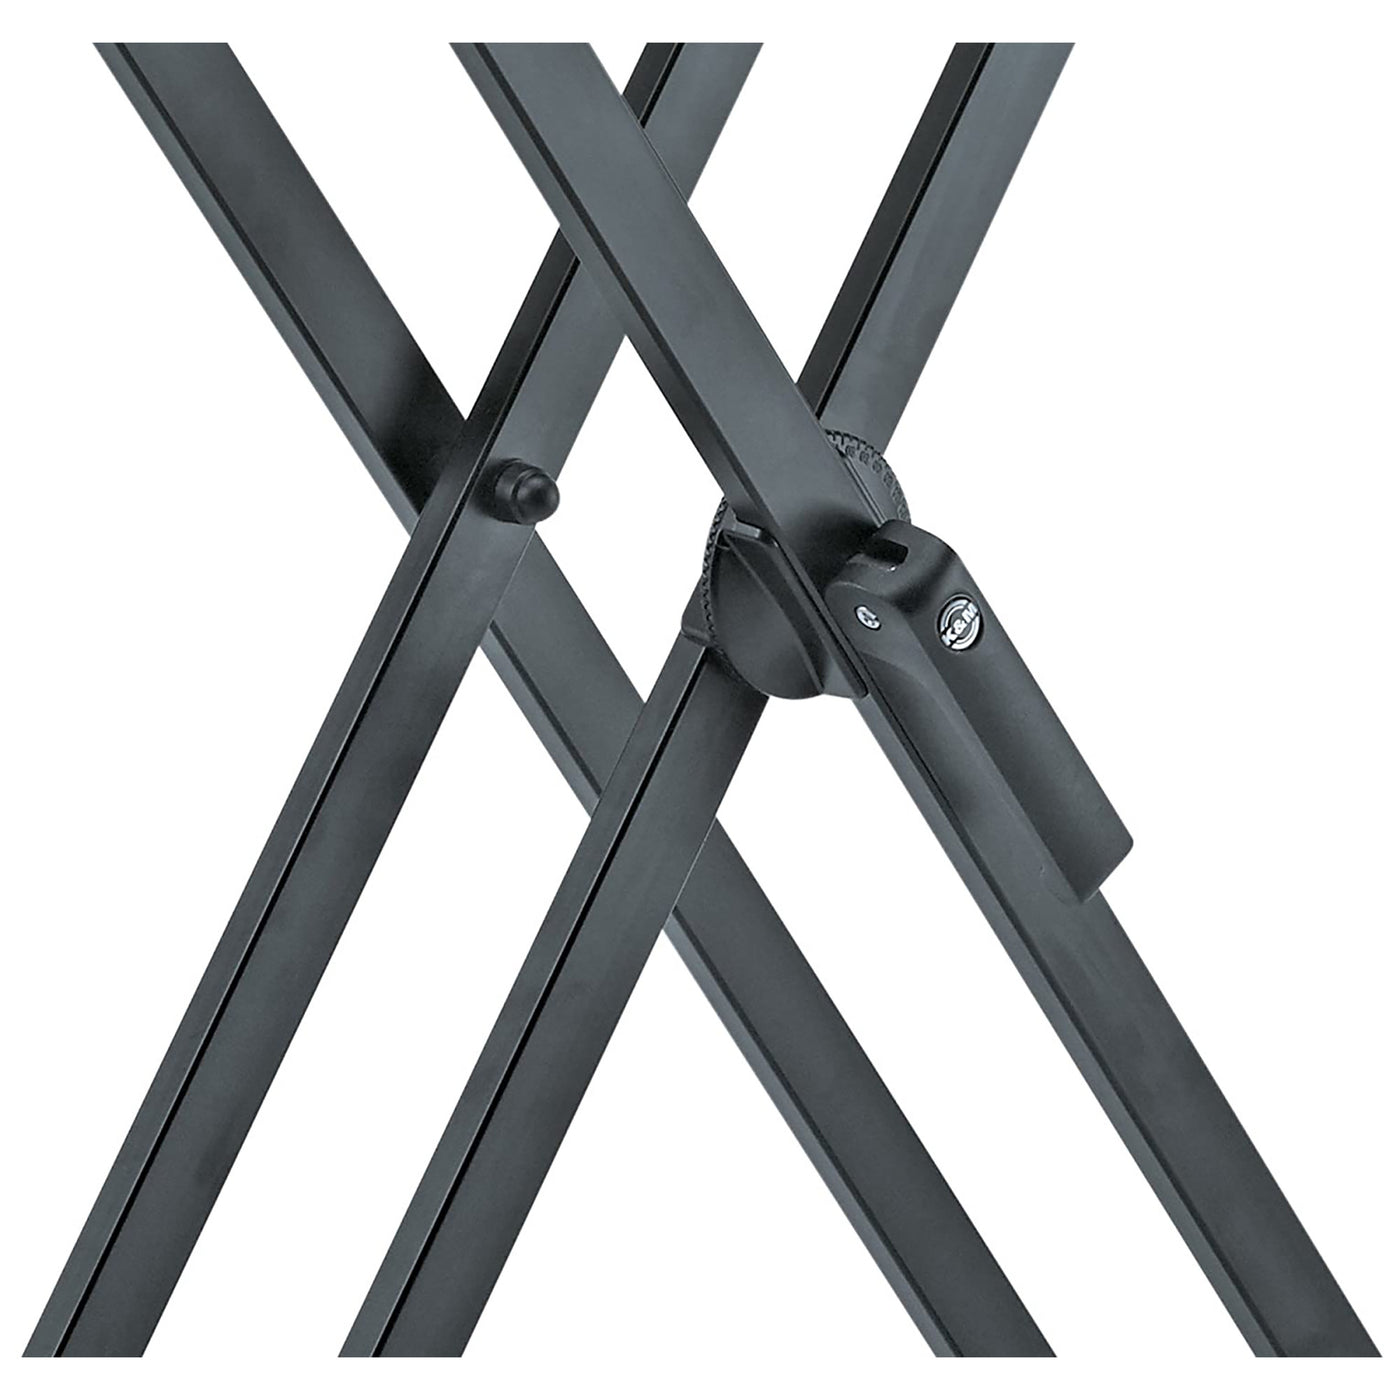 K&M Double X Quick Adjust Keyboard Stand